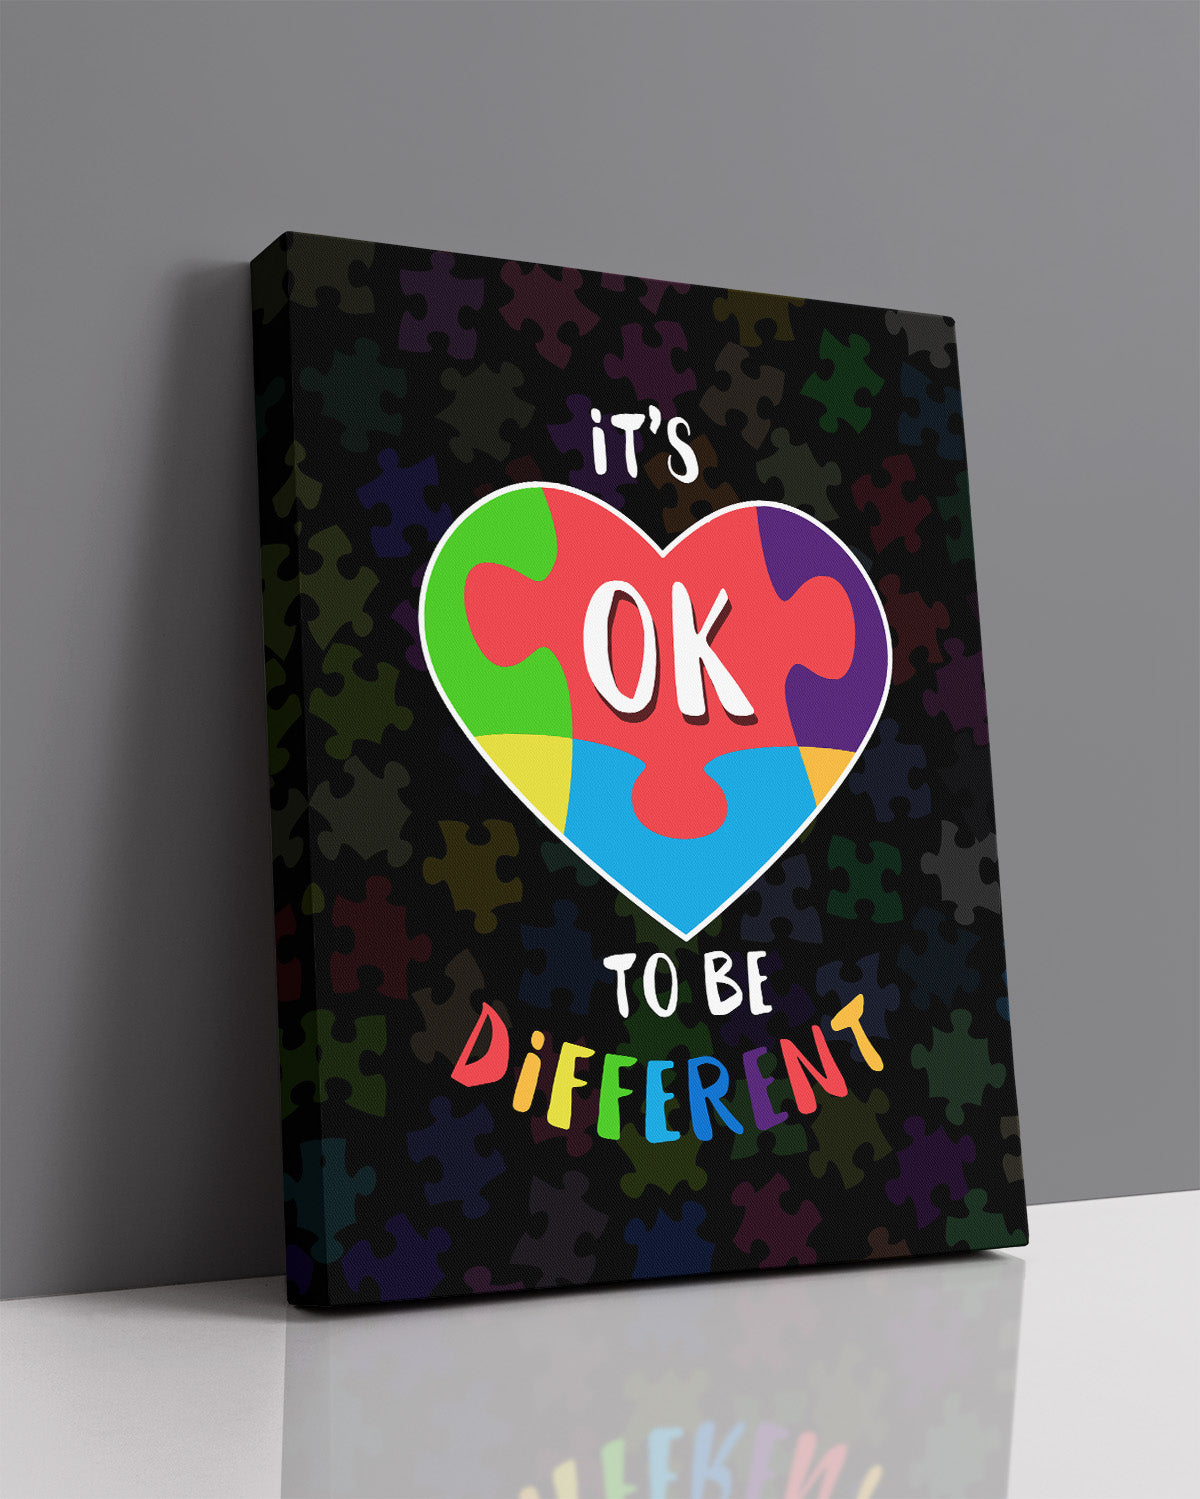 It's Ok To Be Different Autism Awareness Decor - Autism Art Wall Decor Classroom